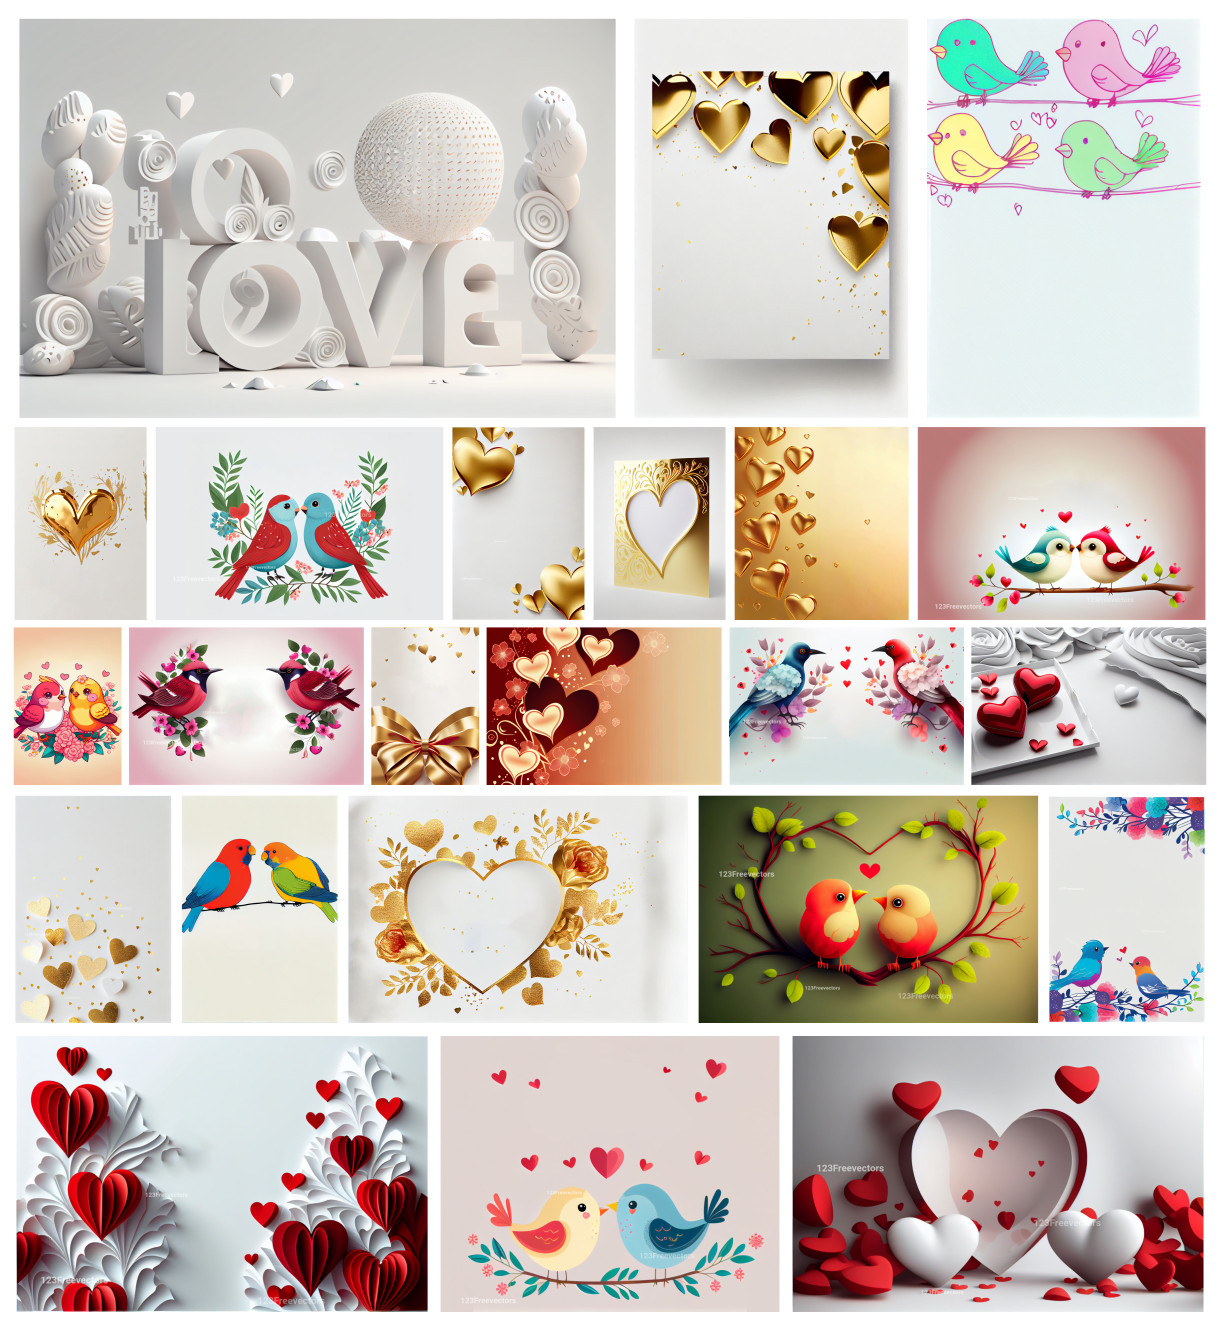 Cherished Valentines Greetings: Embrace Love with 40+ Greeting Designs